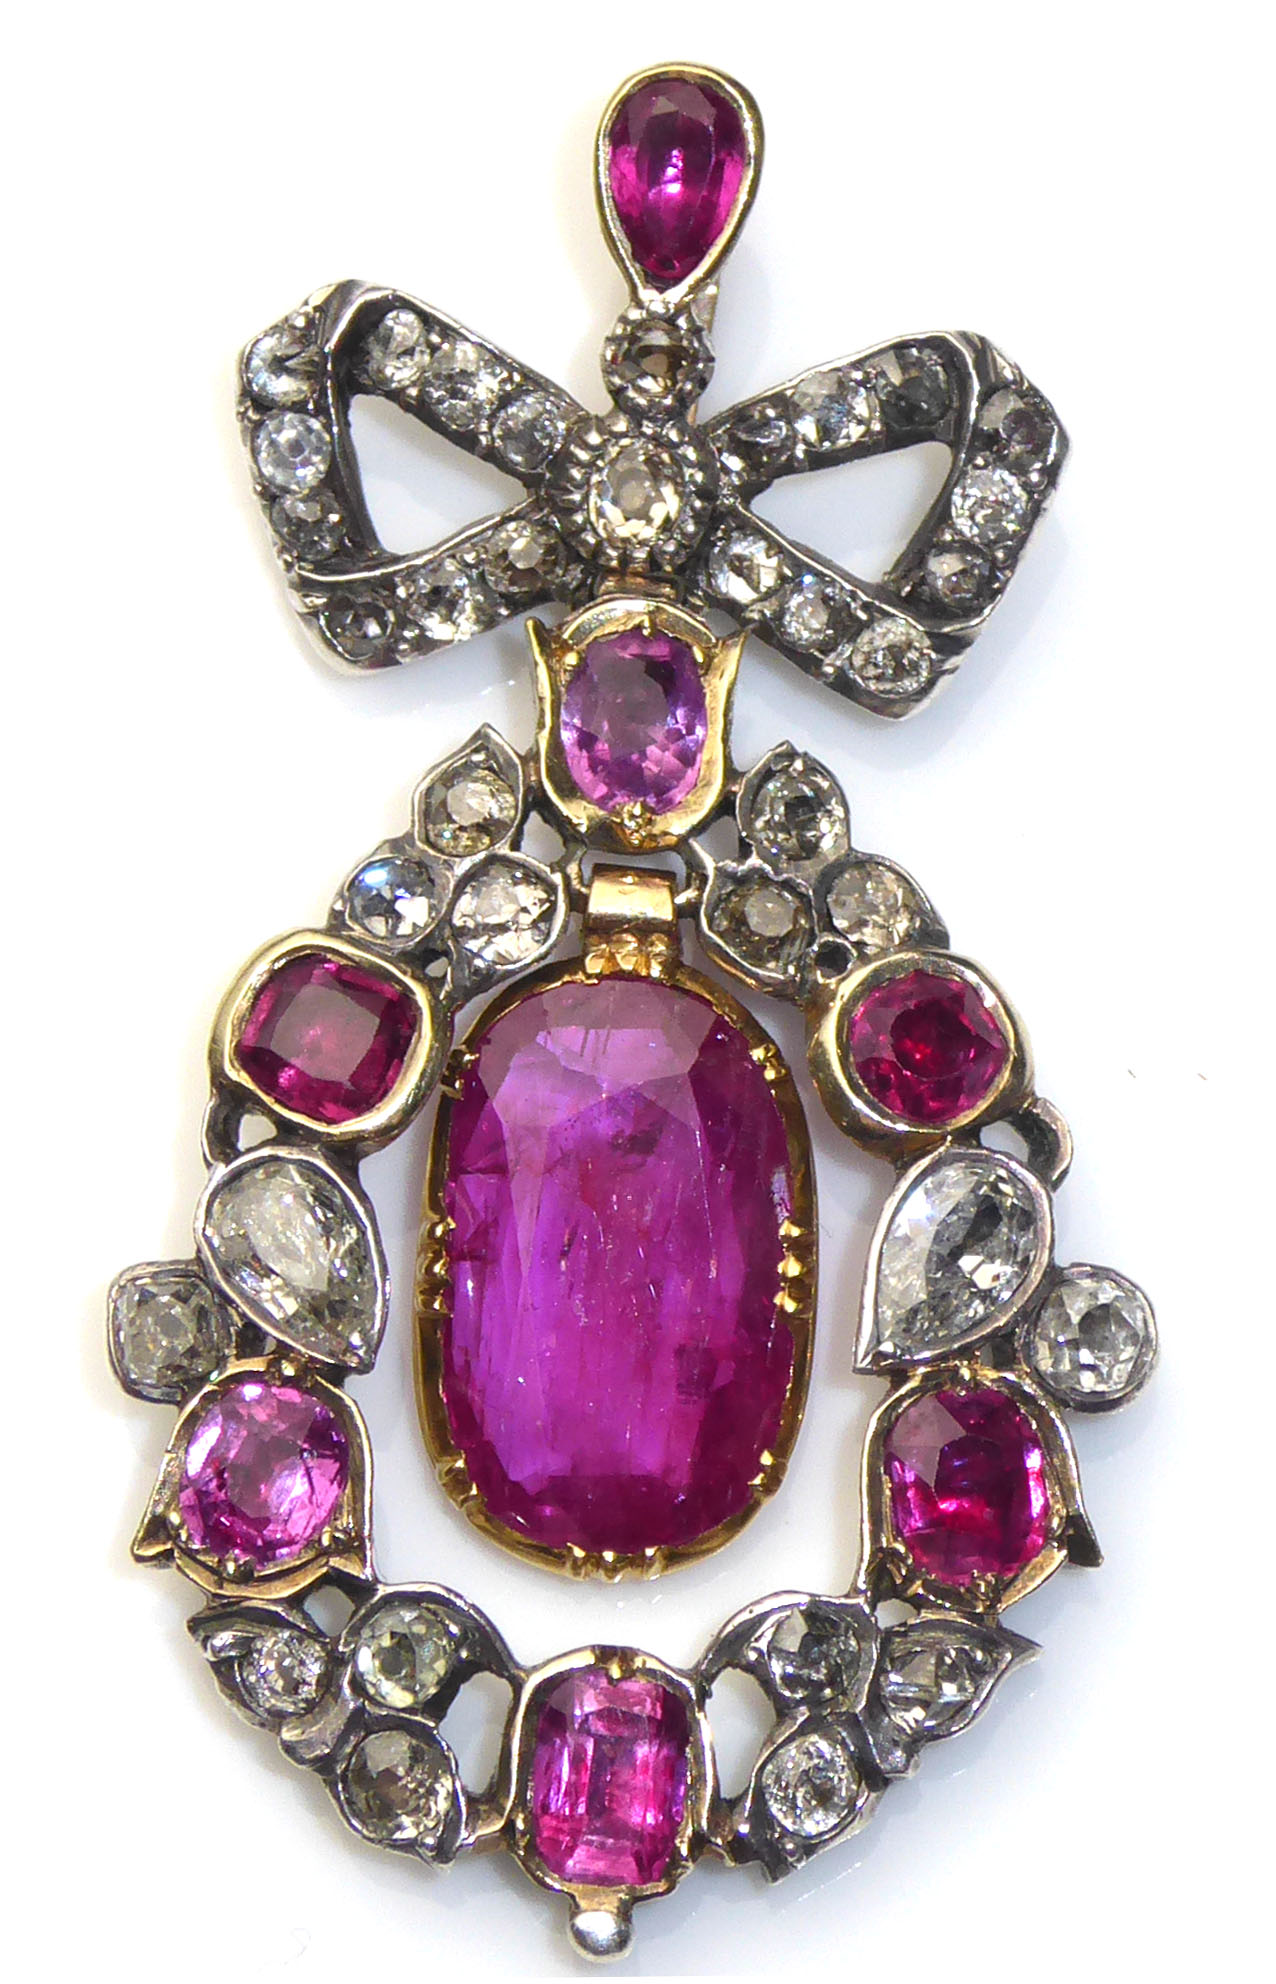 AN IMPRESSIVE 19TH CENTURY BURMESE RUBY, SAPPHIRE AND DIAMOND PENDANT, CIRCA 1820 The articulated - Image 5 of 10